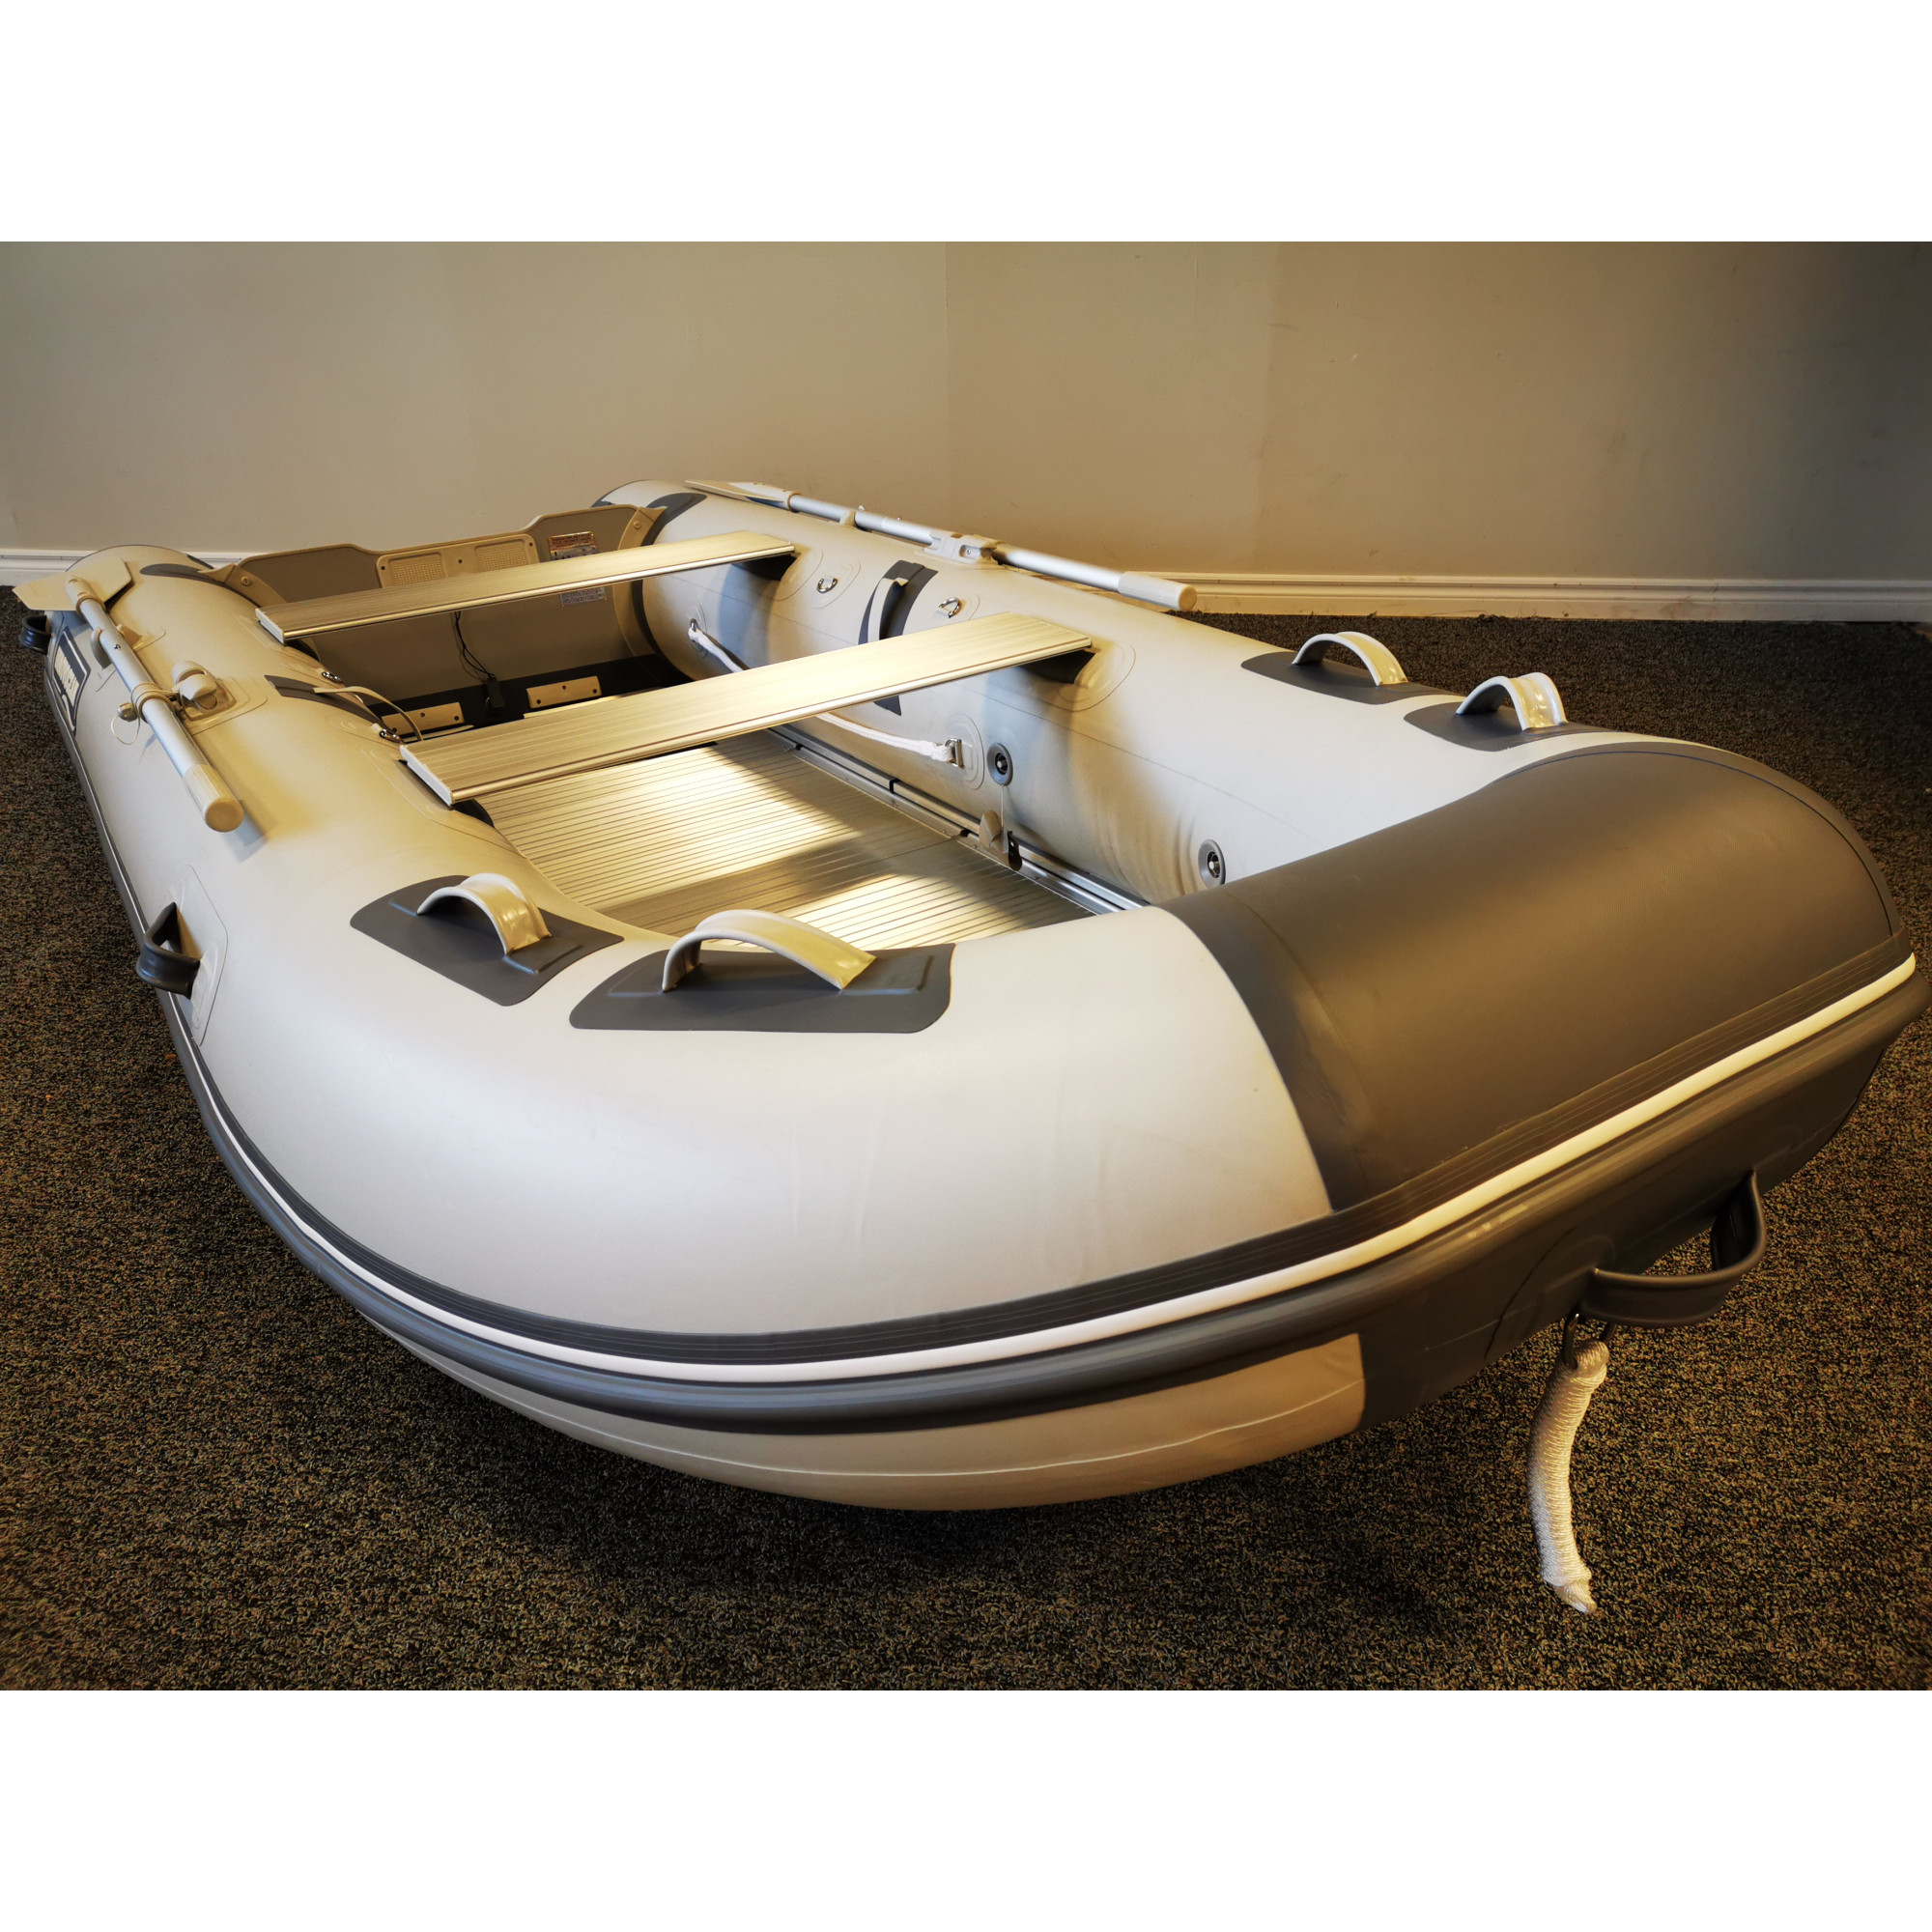 Image detail for -Affordable Inflatable Pontoon Boats